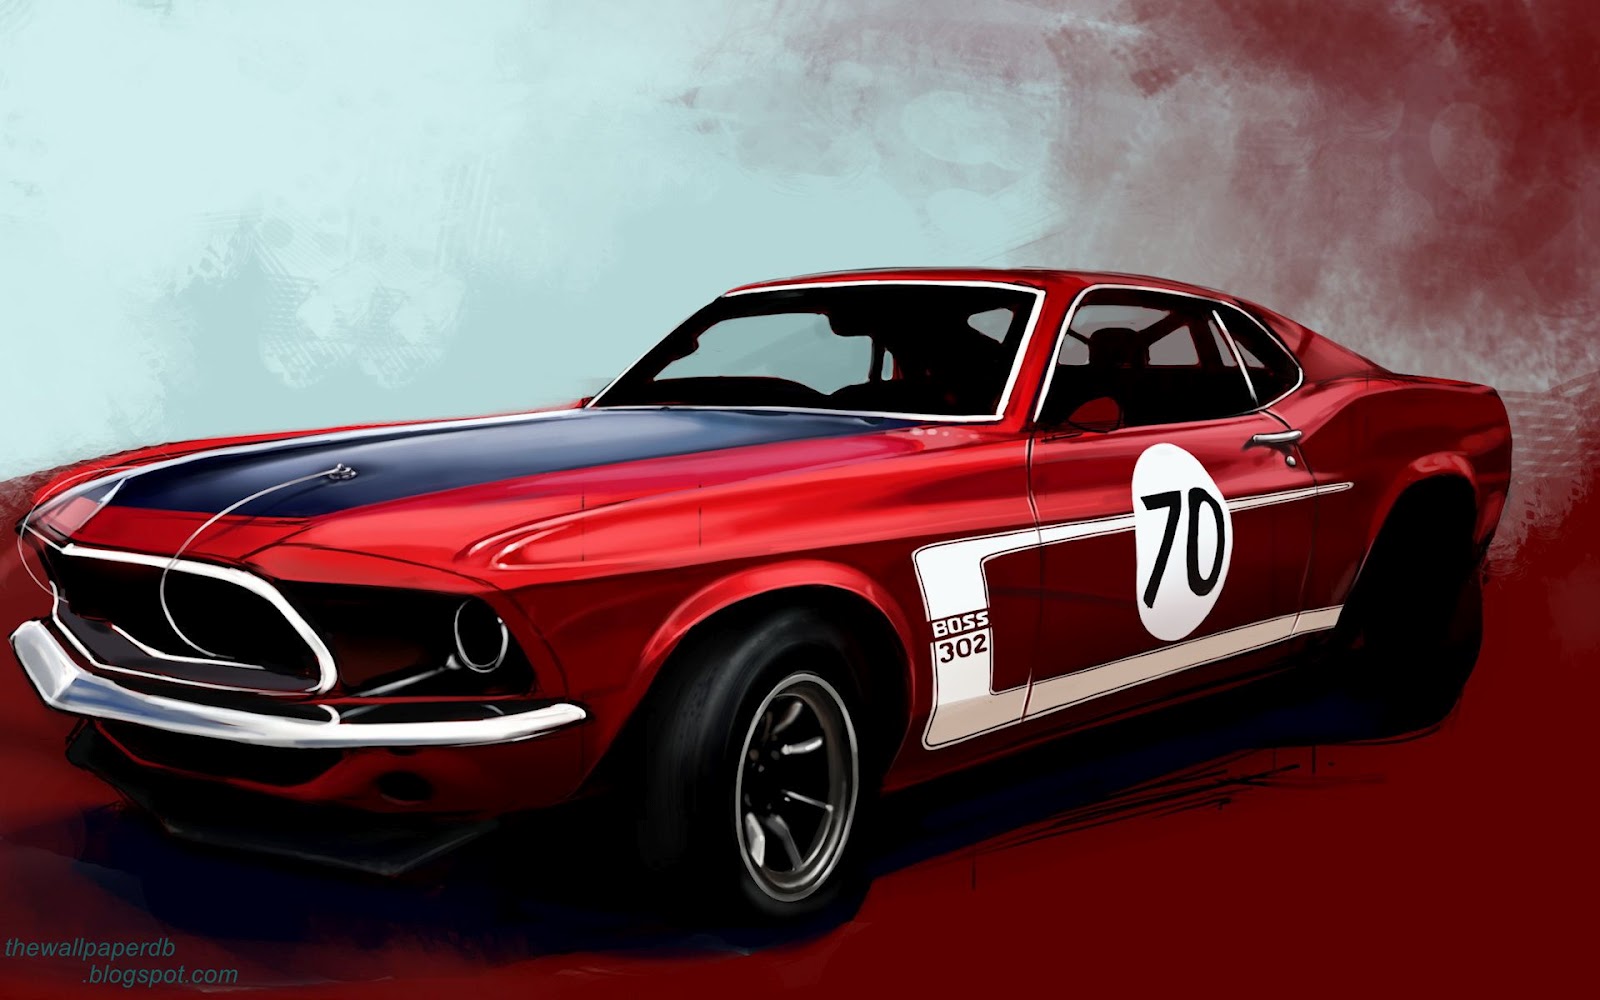 V8 Ford Mustang Shelby From Wallpaper